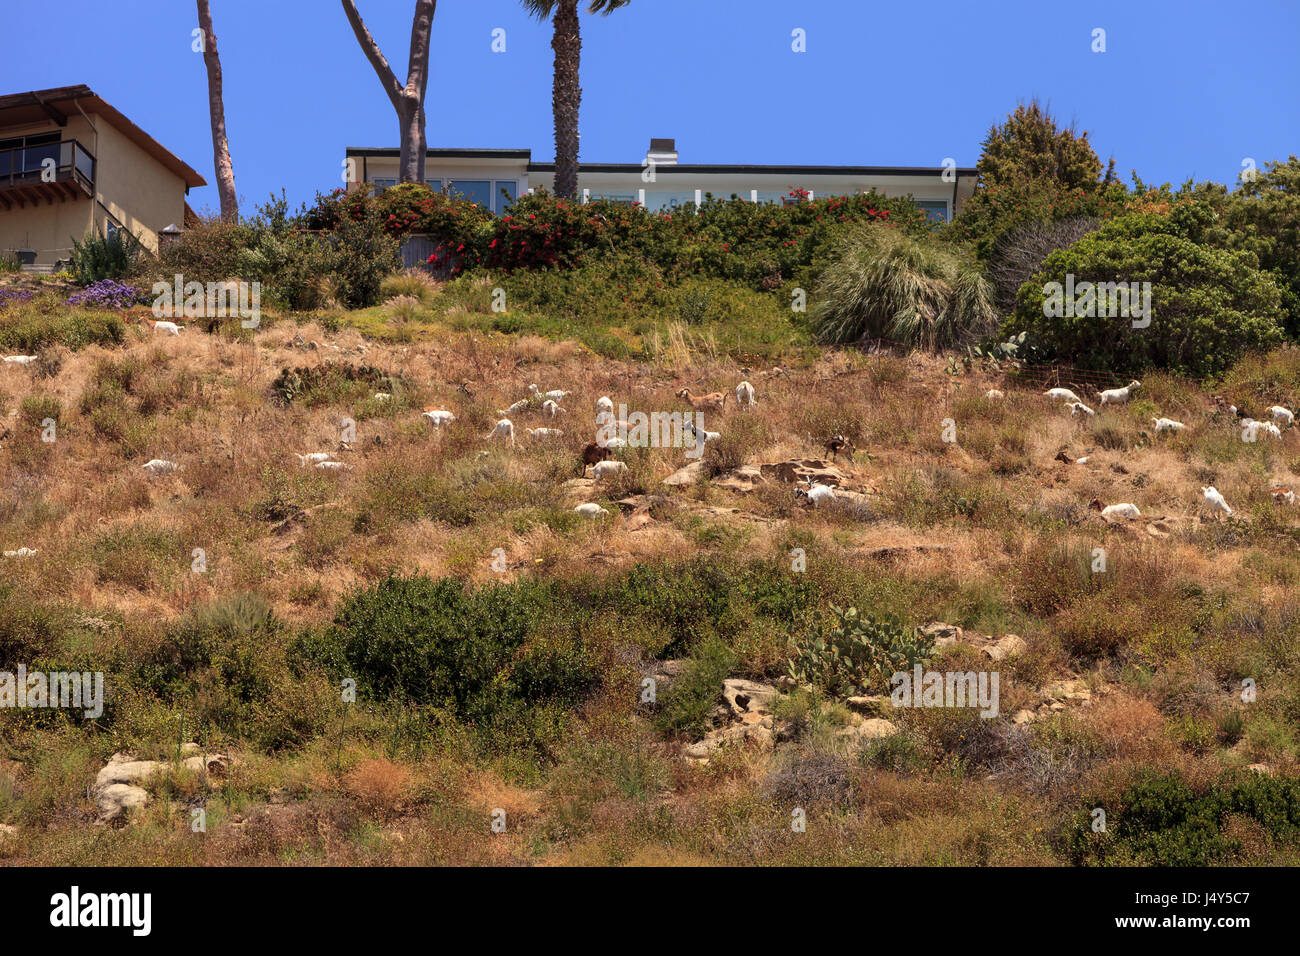 Goats cluster along a hillside with homes and a tower in Laguna Beach as a means of land maintenance and eating away wild brush that could lead to wil Stock Photo